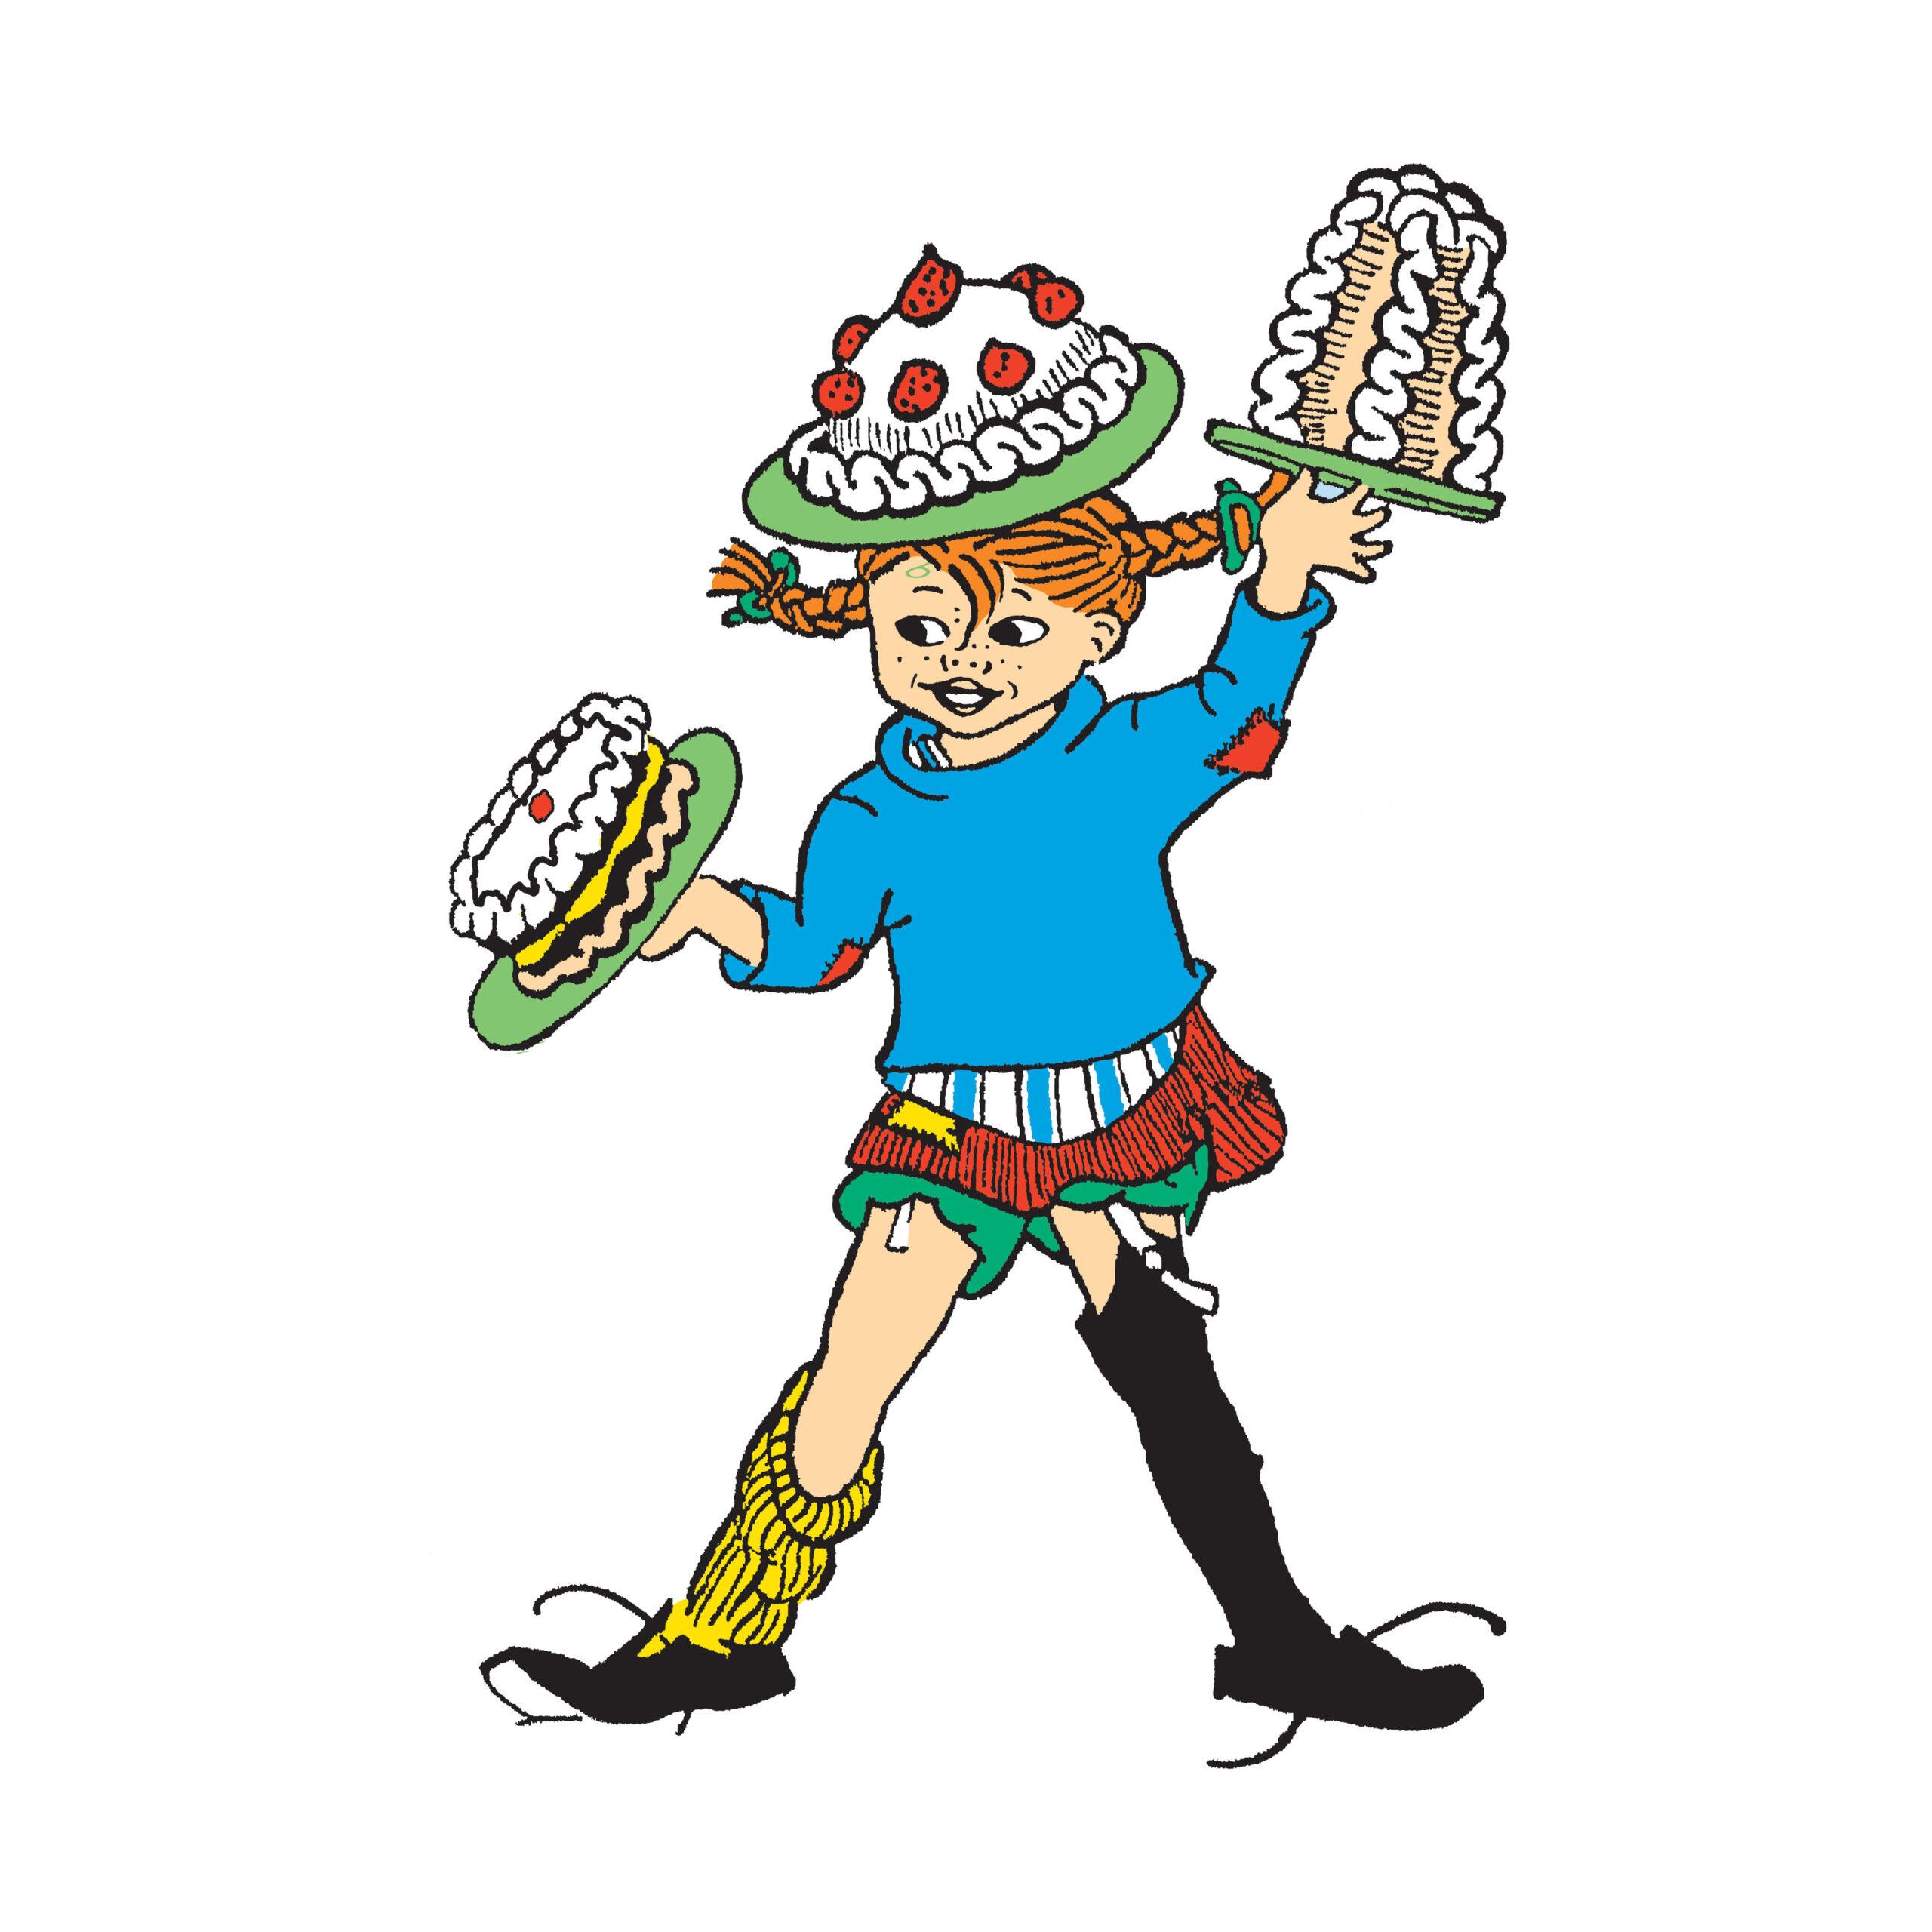 An illustration of Pippi Longstocking with three cakes – one on her head and one in each hand.